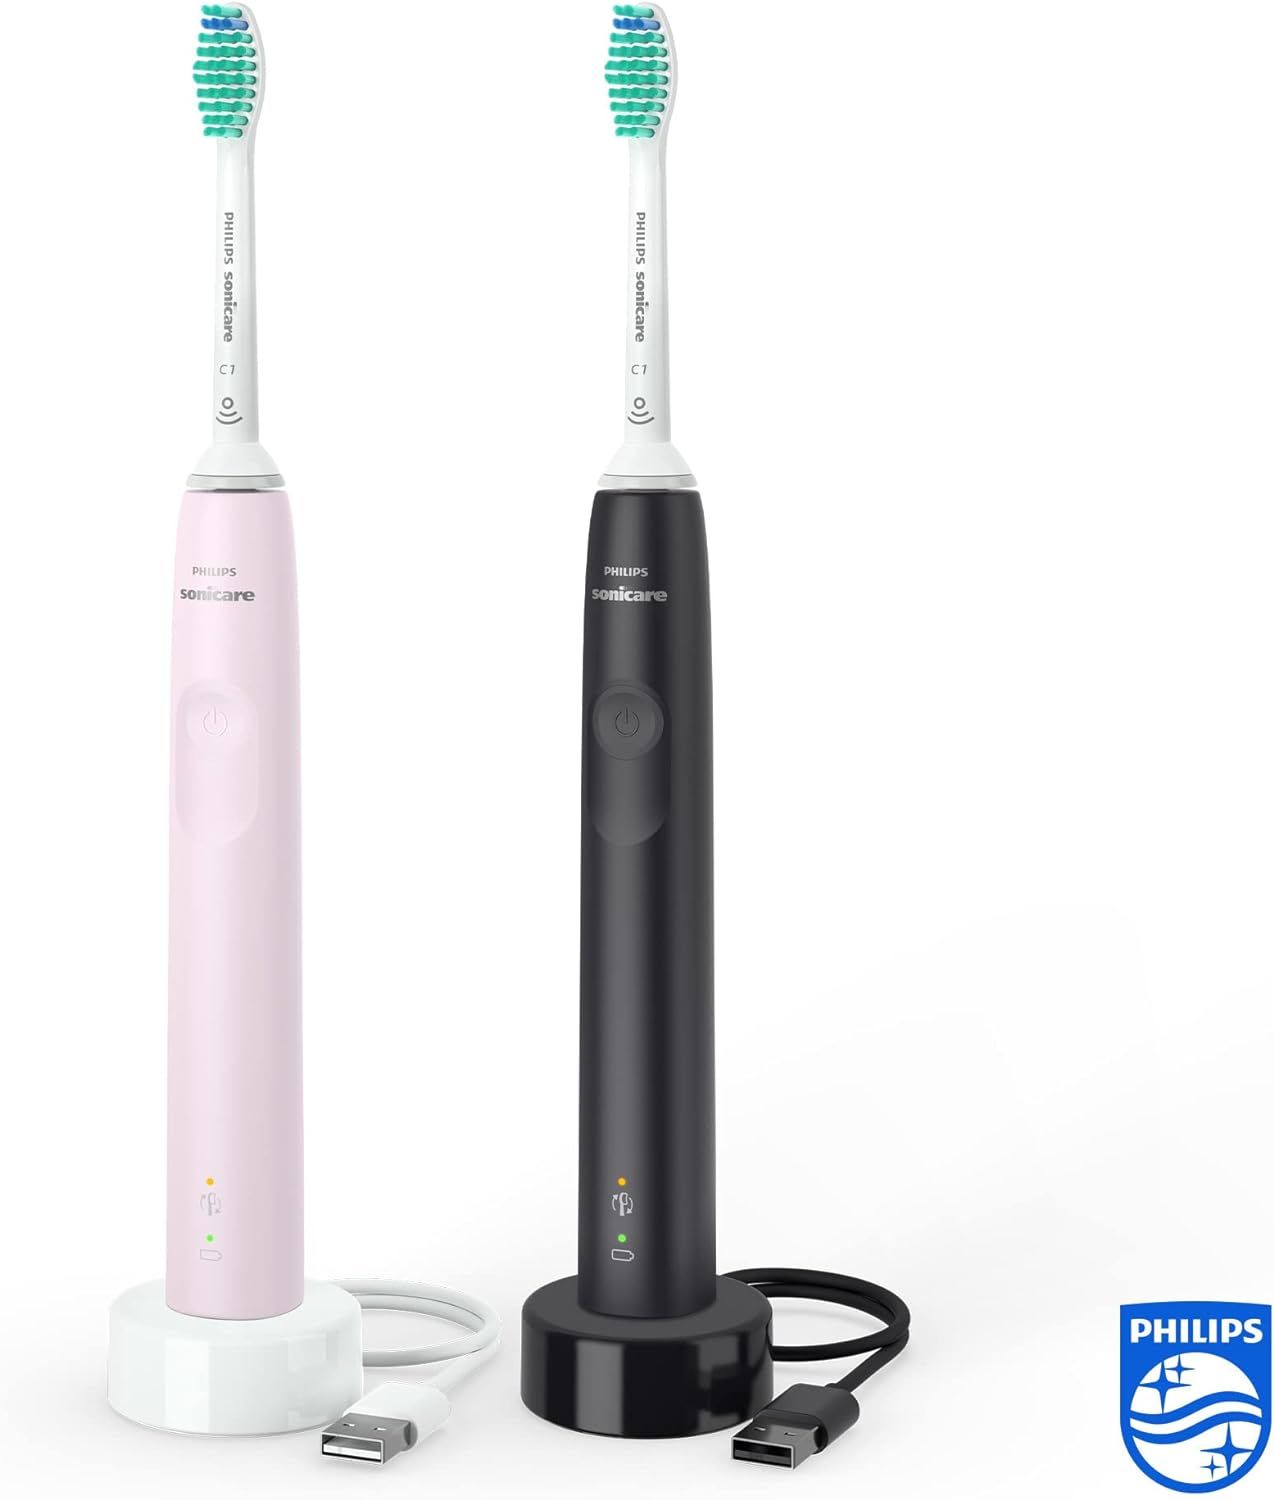 Philips Sonicare 3100 Series Sonic Electric Toothbrush (Dual Pack) with Pressure Sensor and Brush... | Amazon (UK)